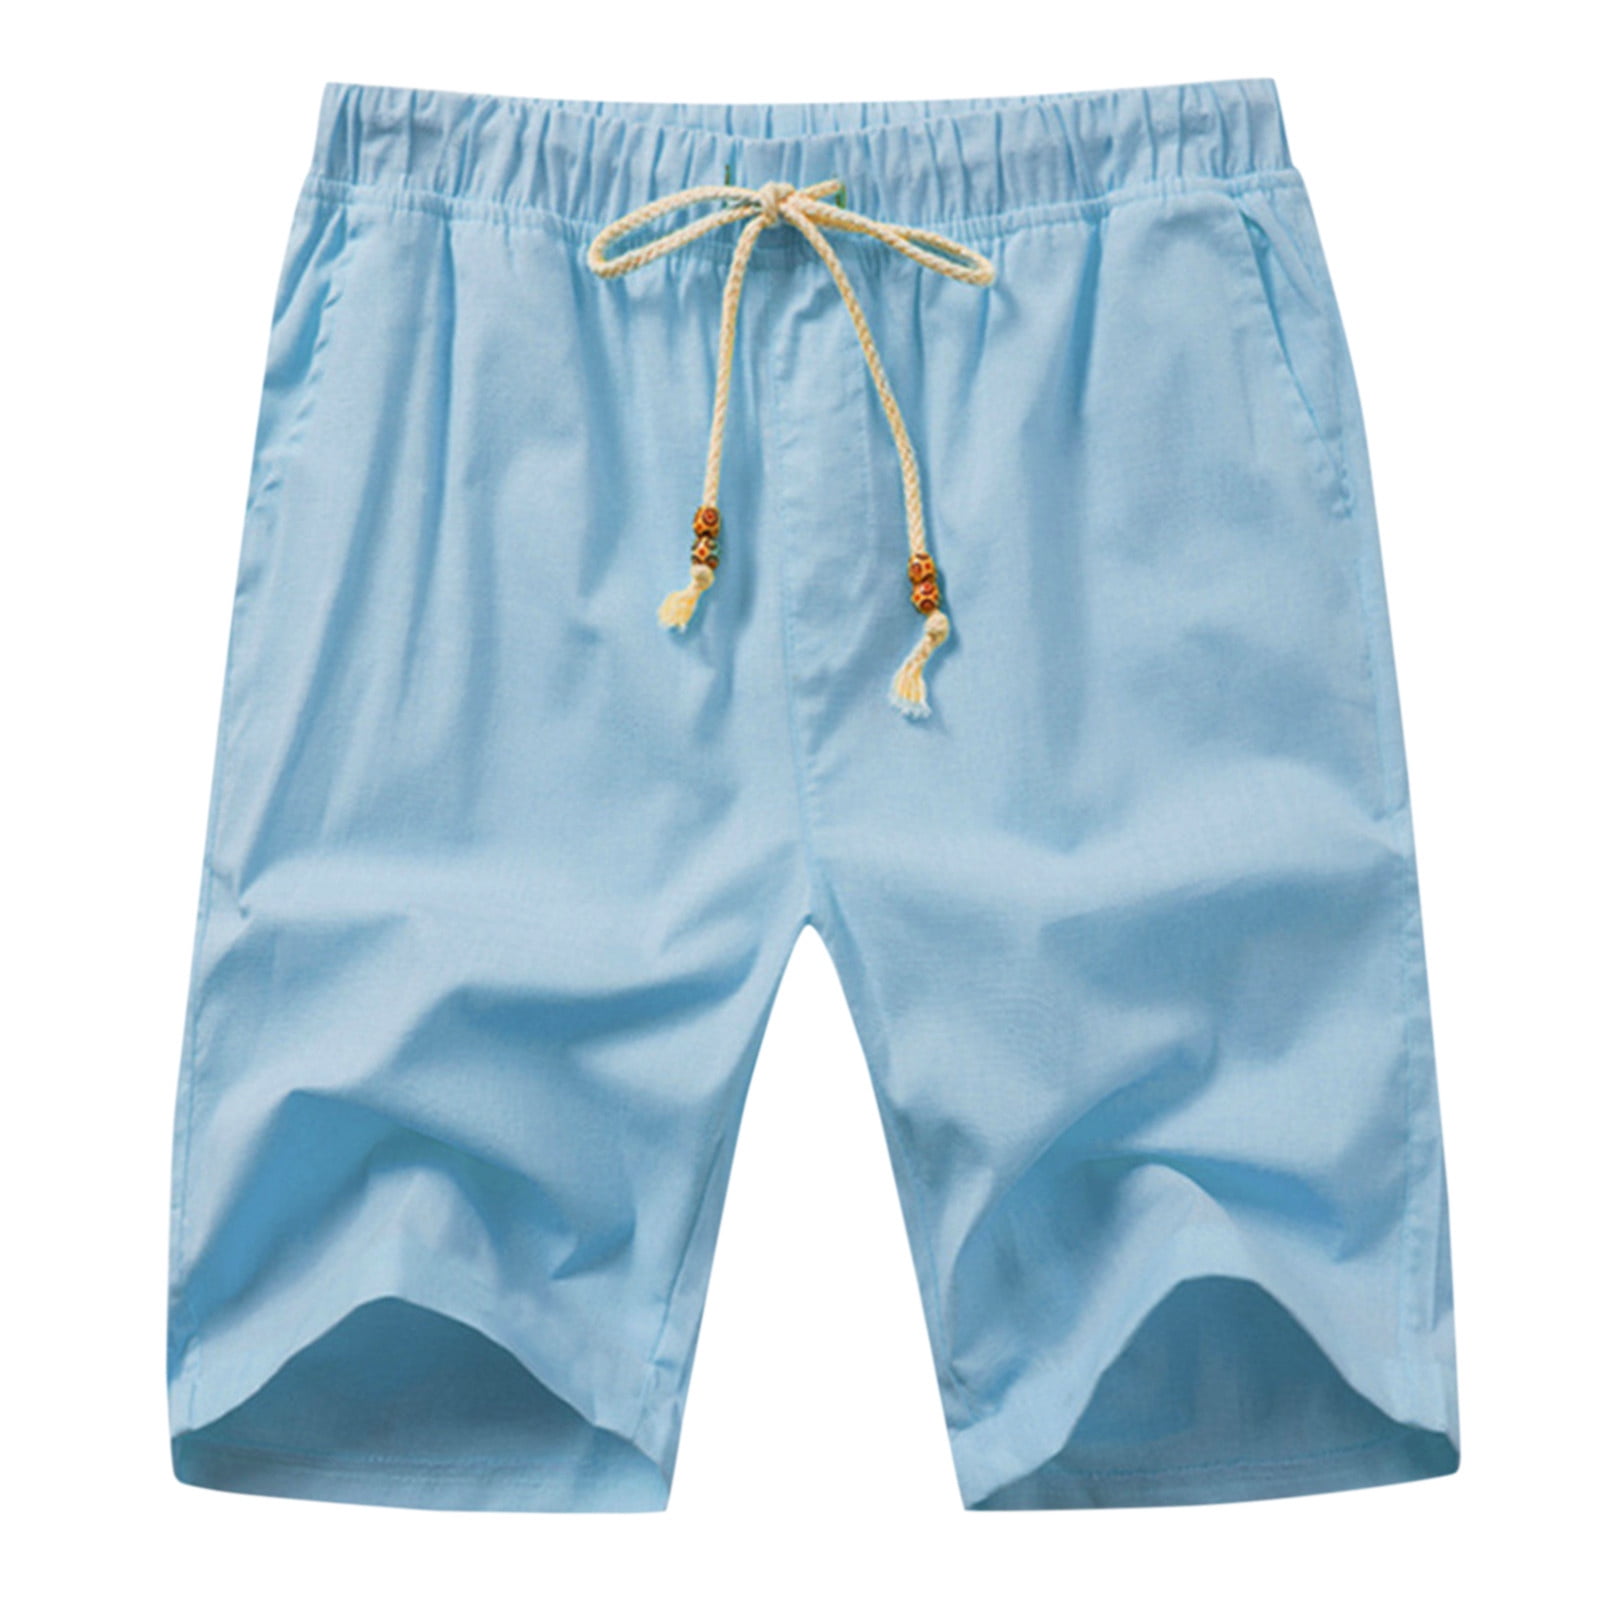 Light Blue Cargo Shorts For Men Male Summer Casual Solid Short Pant ...